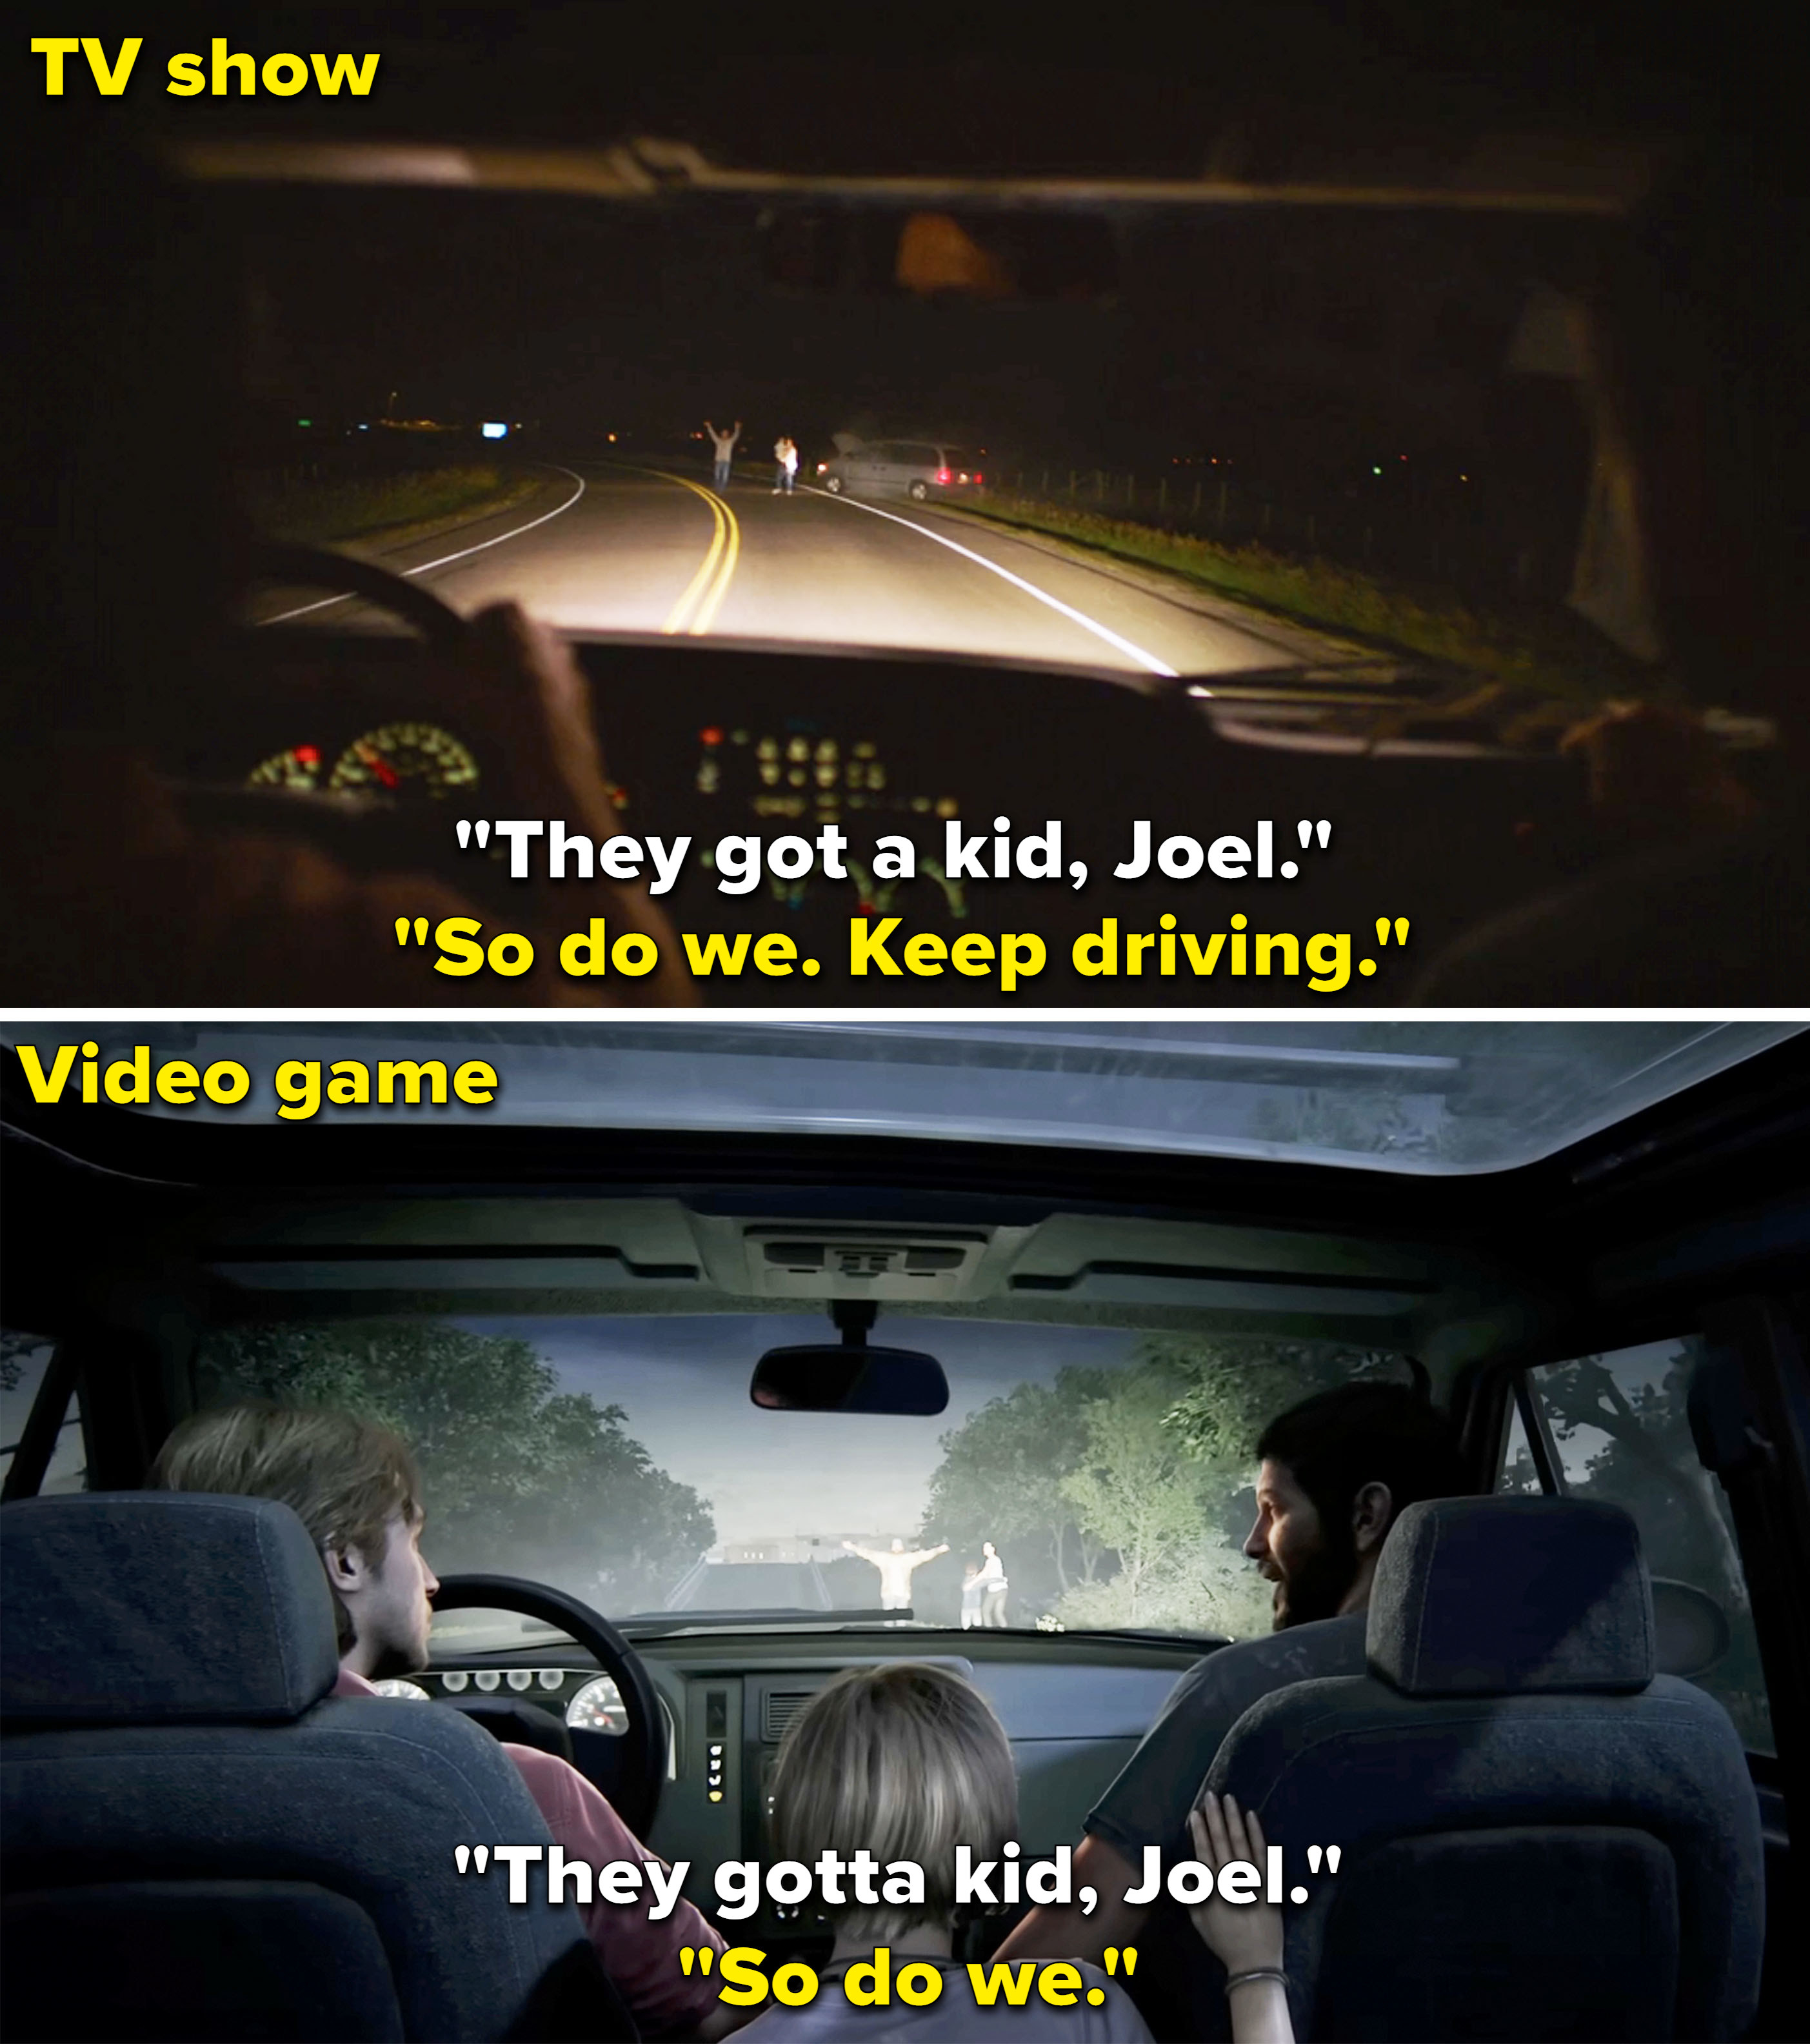 Joel telling Tommy to keep driving and not stop for a family with a child in the show vs game